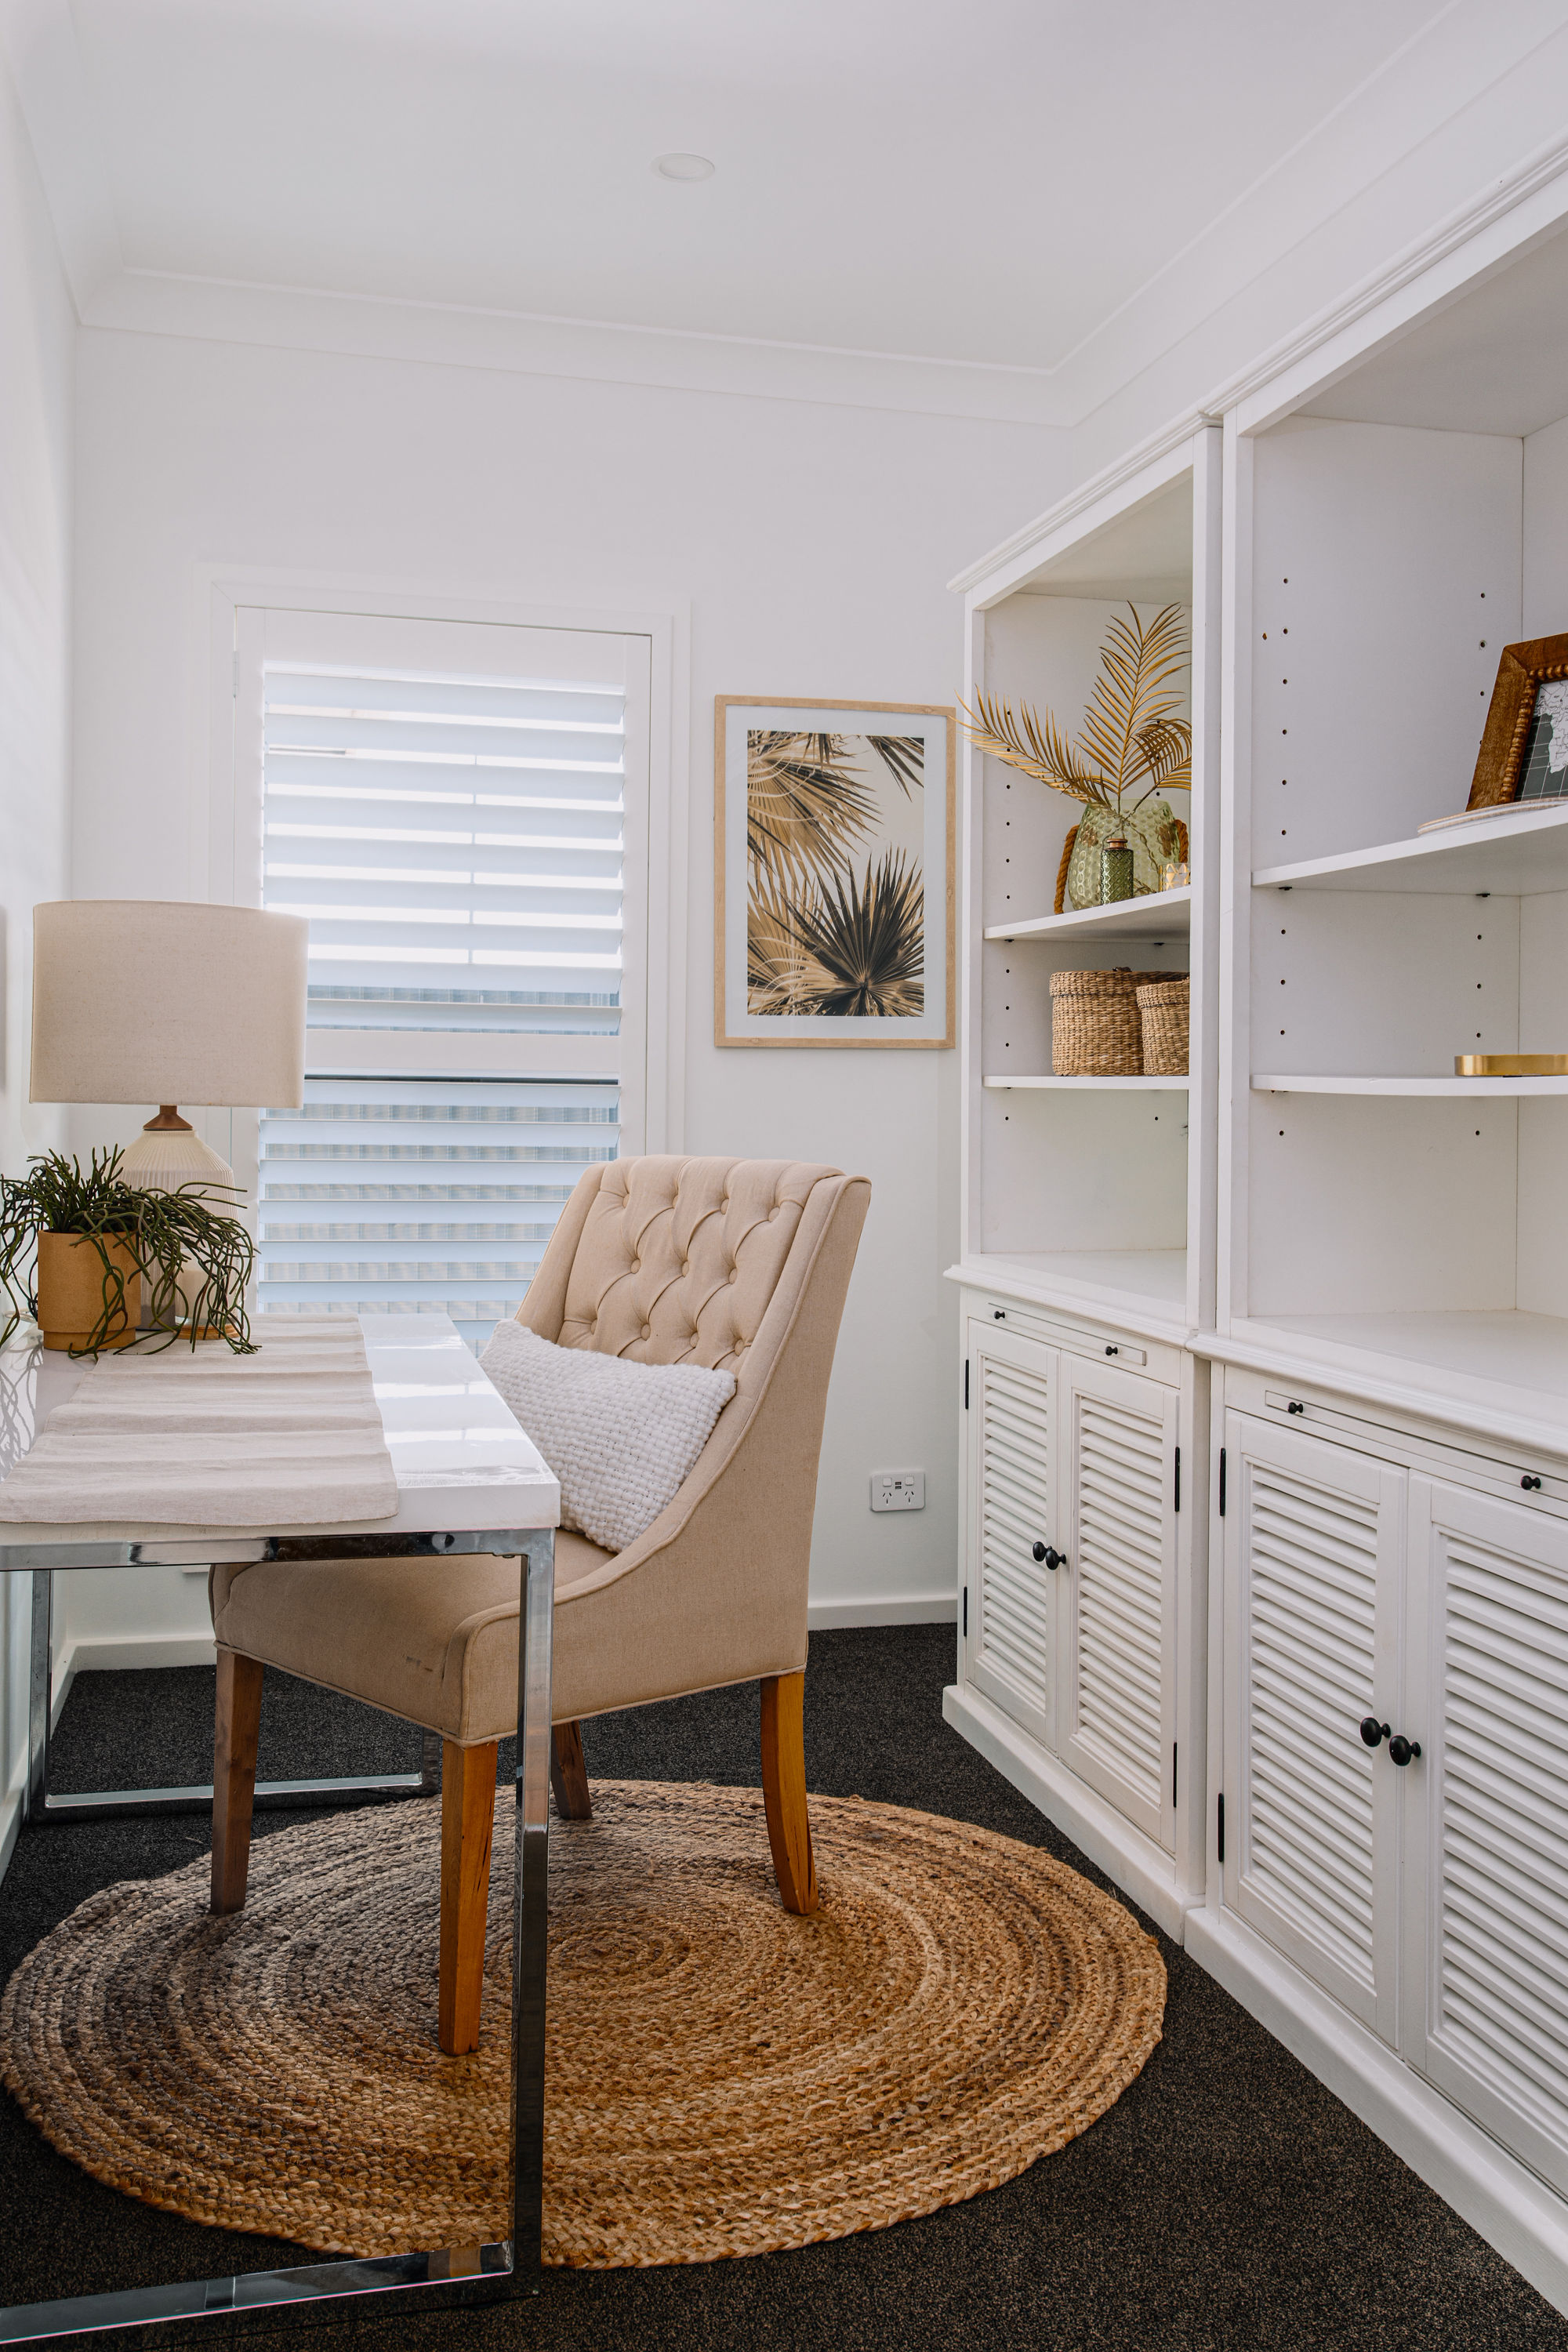  Styling Interior | Stage my Home to Sell - Australian Hamptons Album